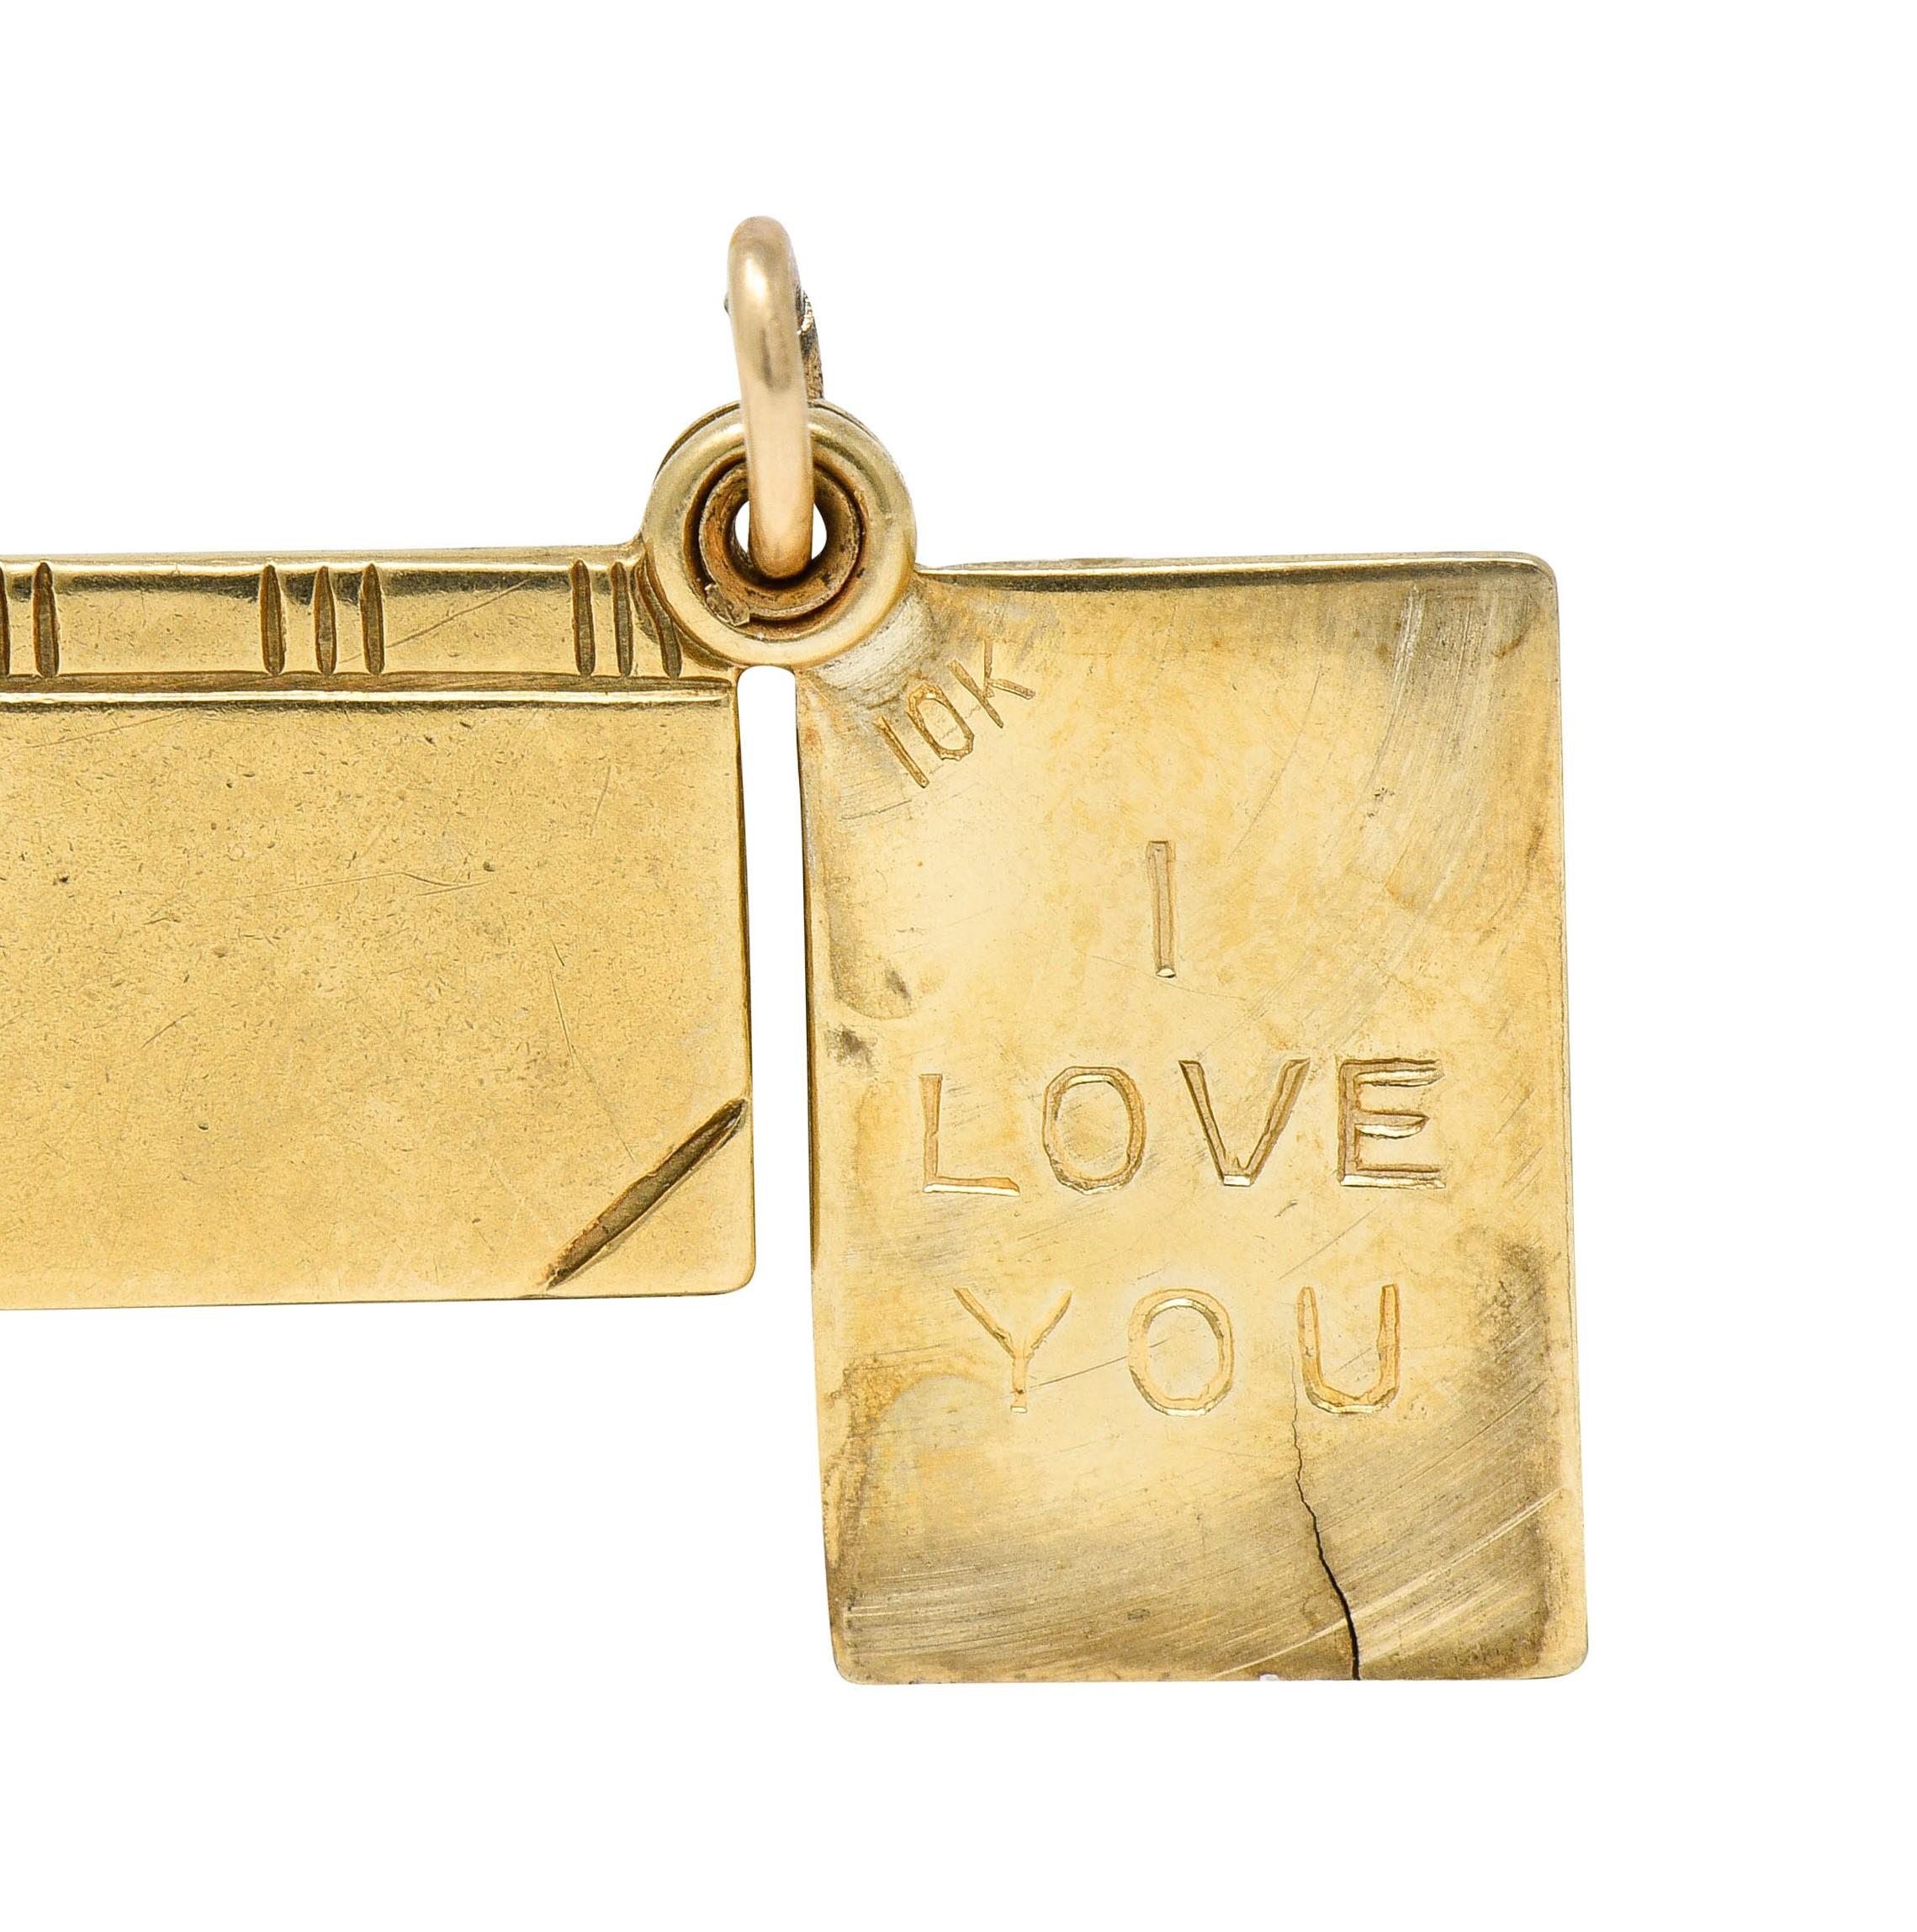 Charm is designed as a book with deeply engraved cover details

It swivels open to reveal the engraved words 'I Love You'

Completed by jump ring bale

Stamped 10K for 10 karat gold

Circa: 1940s

Measures: 3/8 x 5/8 inch

Total weight: 1.6